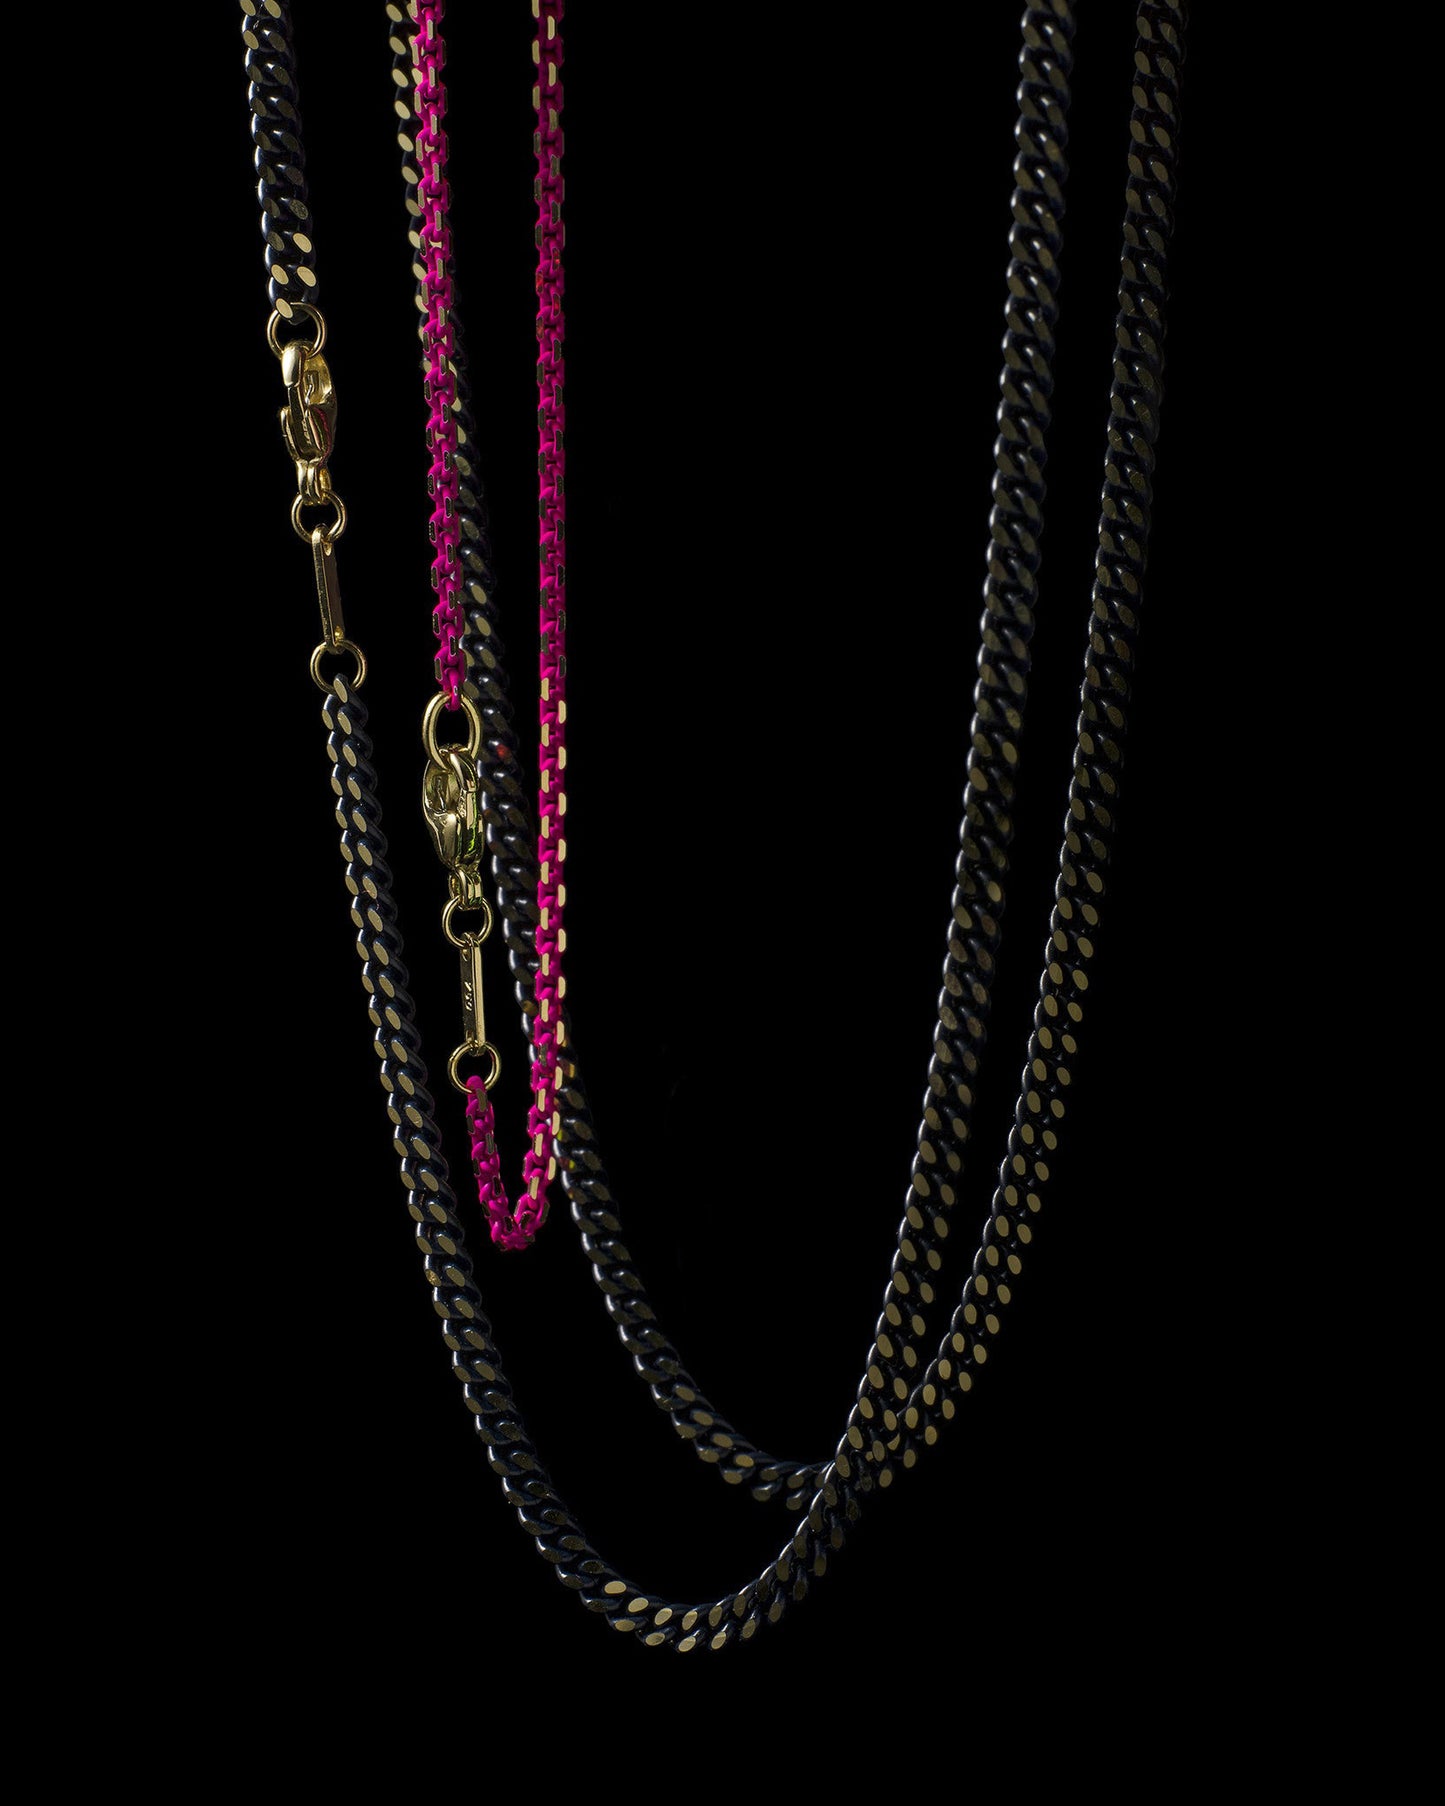 NEON AND MIDNIGHT PURPLE CHAINS